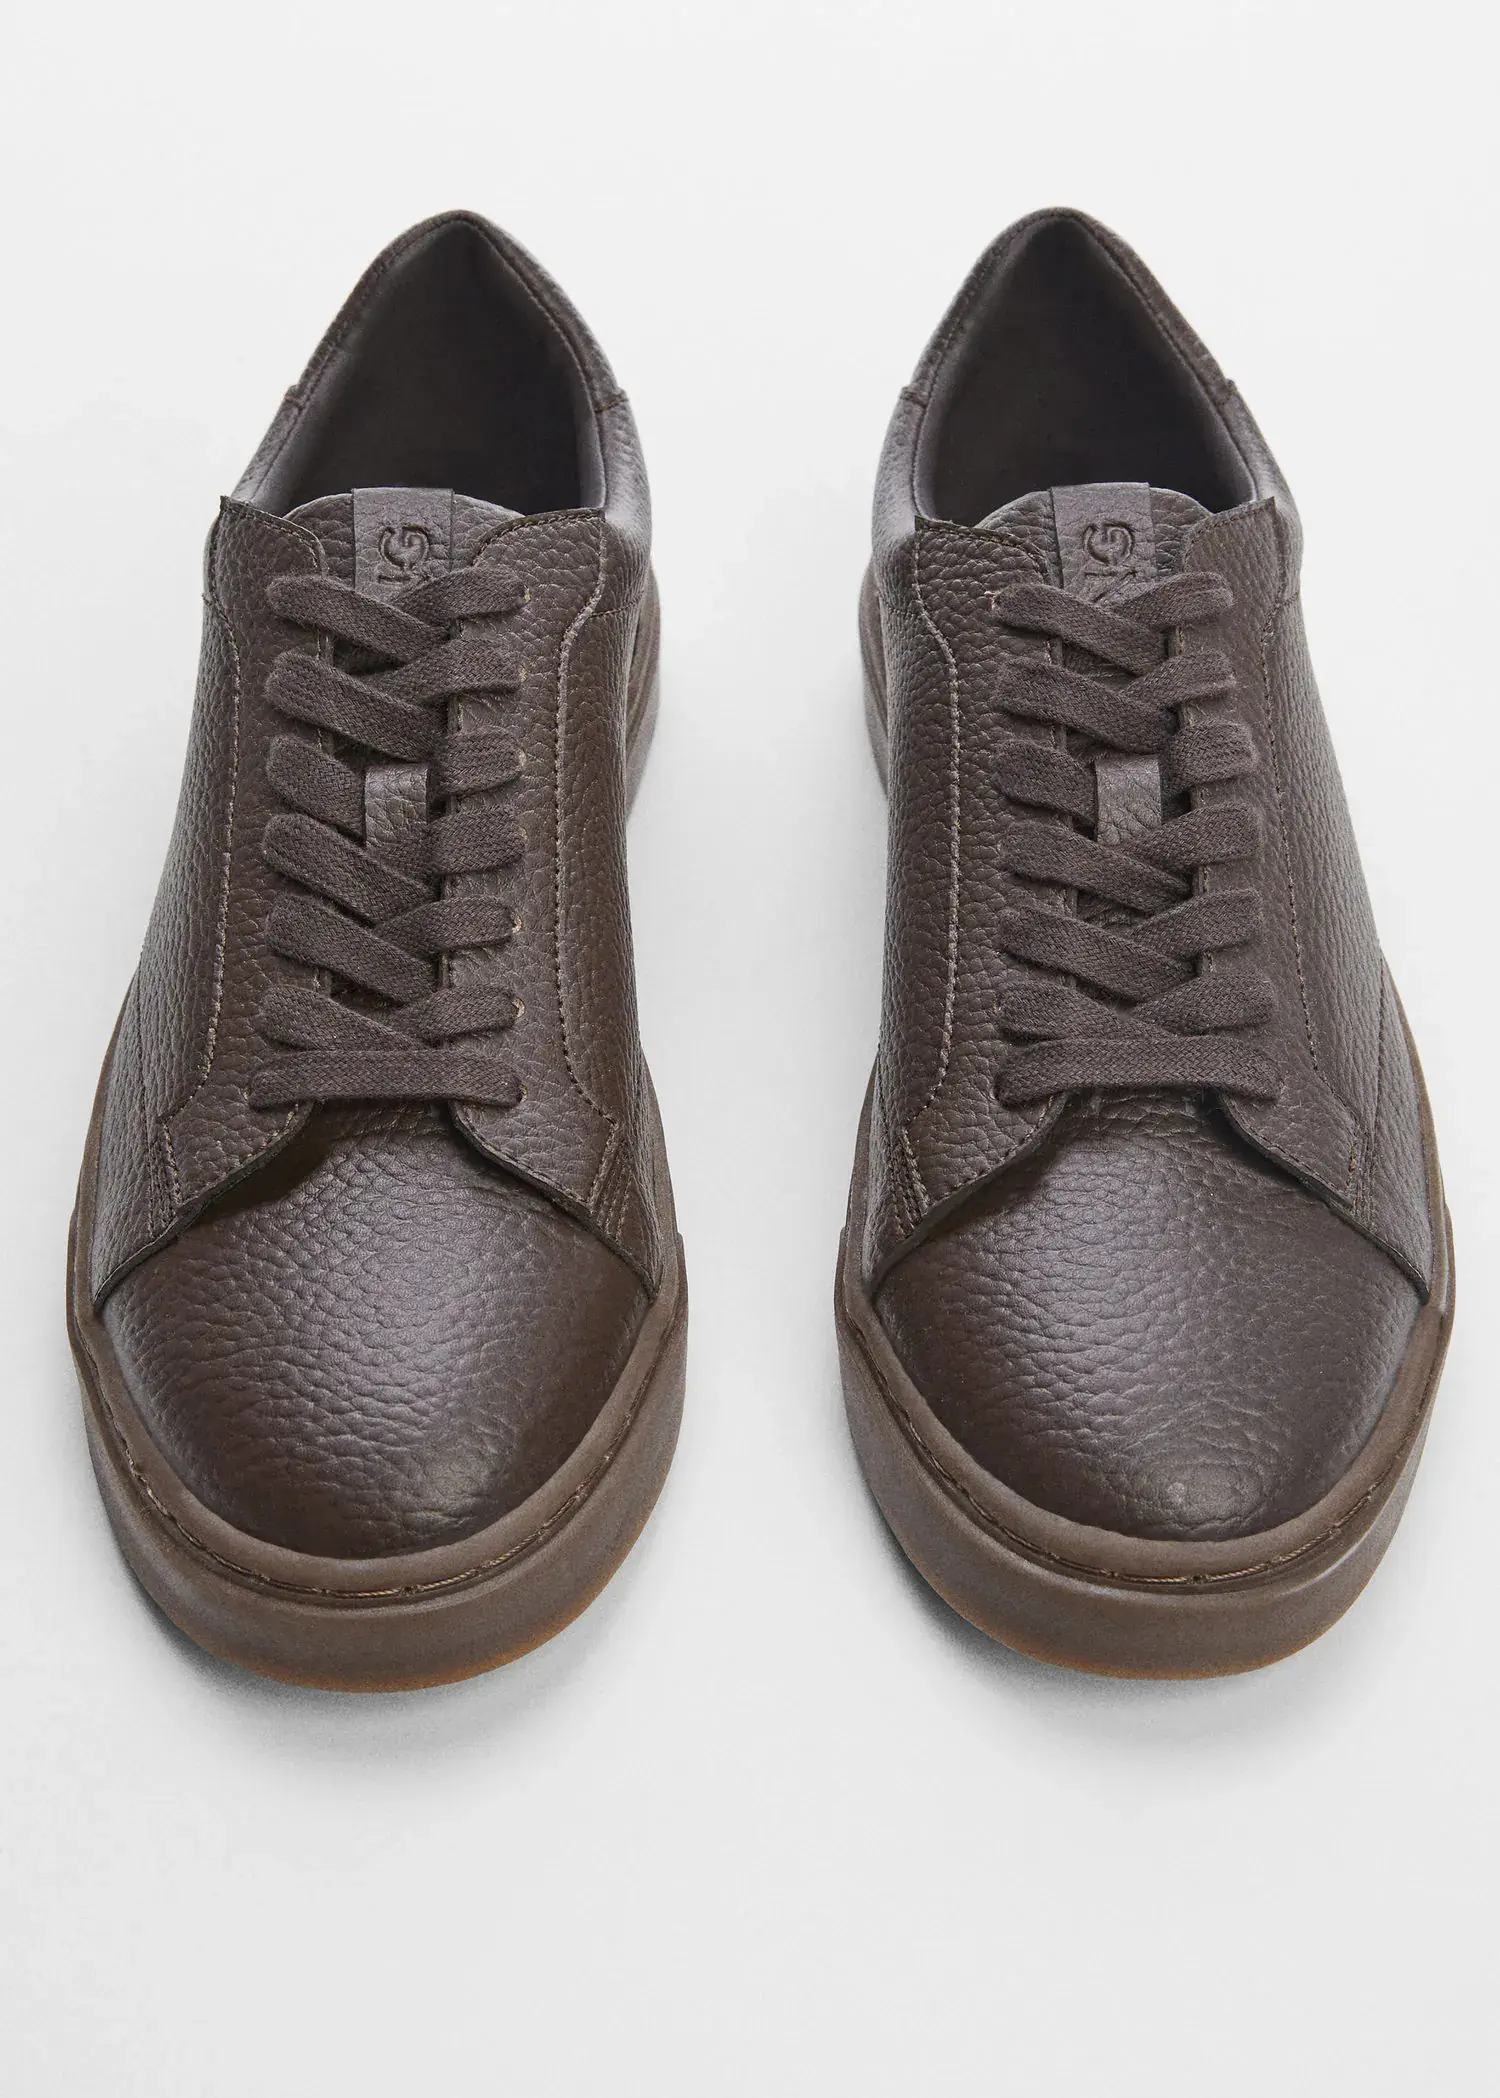 Mango Pebbled leather sneakers. a close up of a pair of shoes on a table 